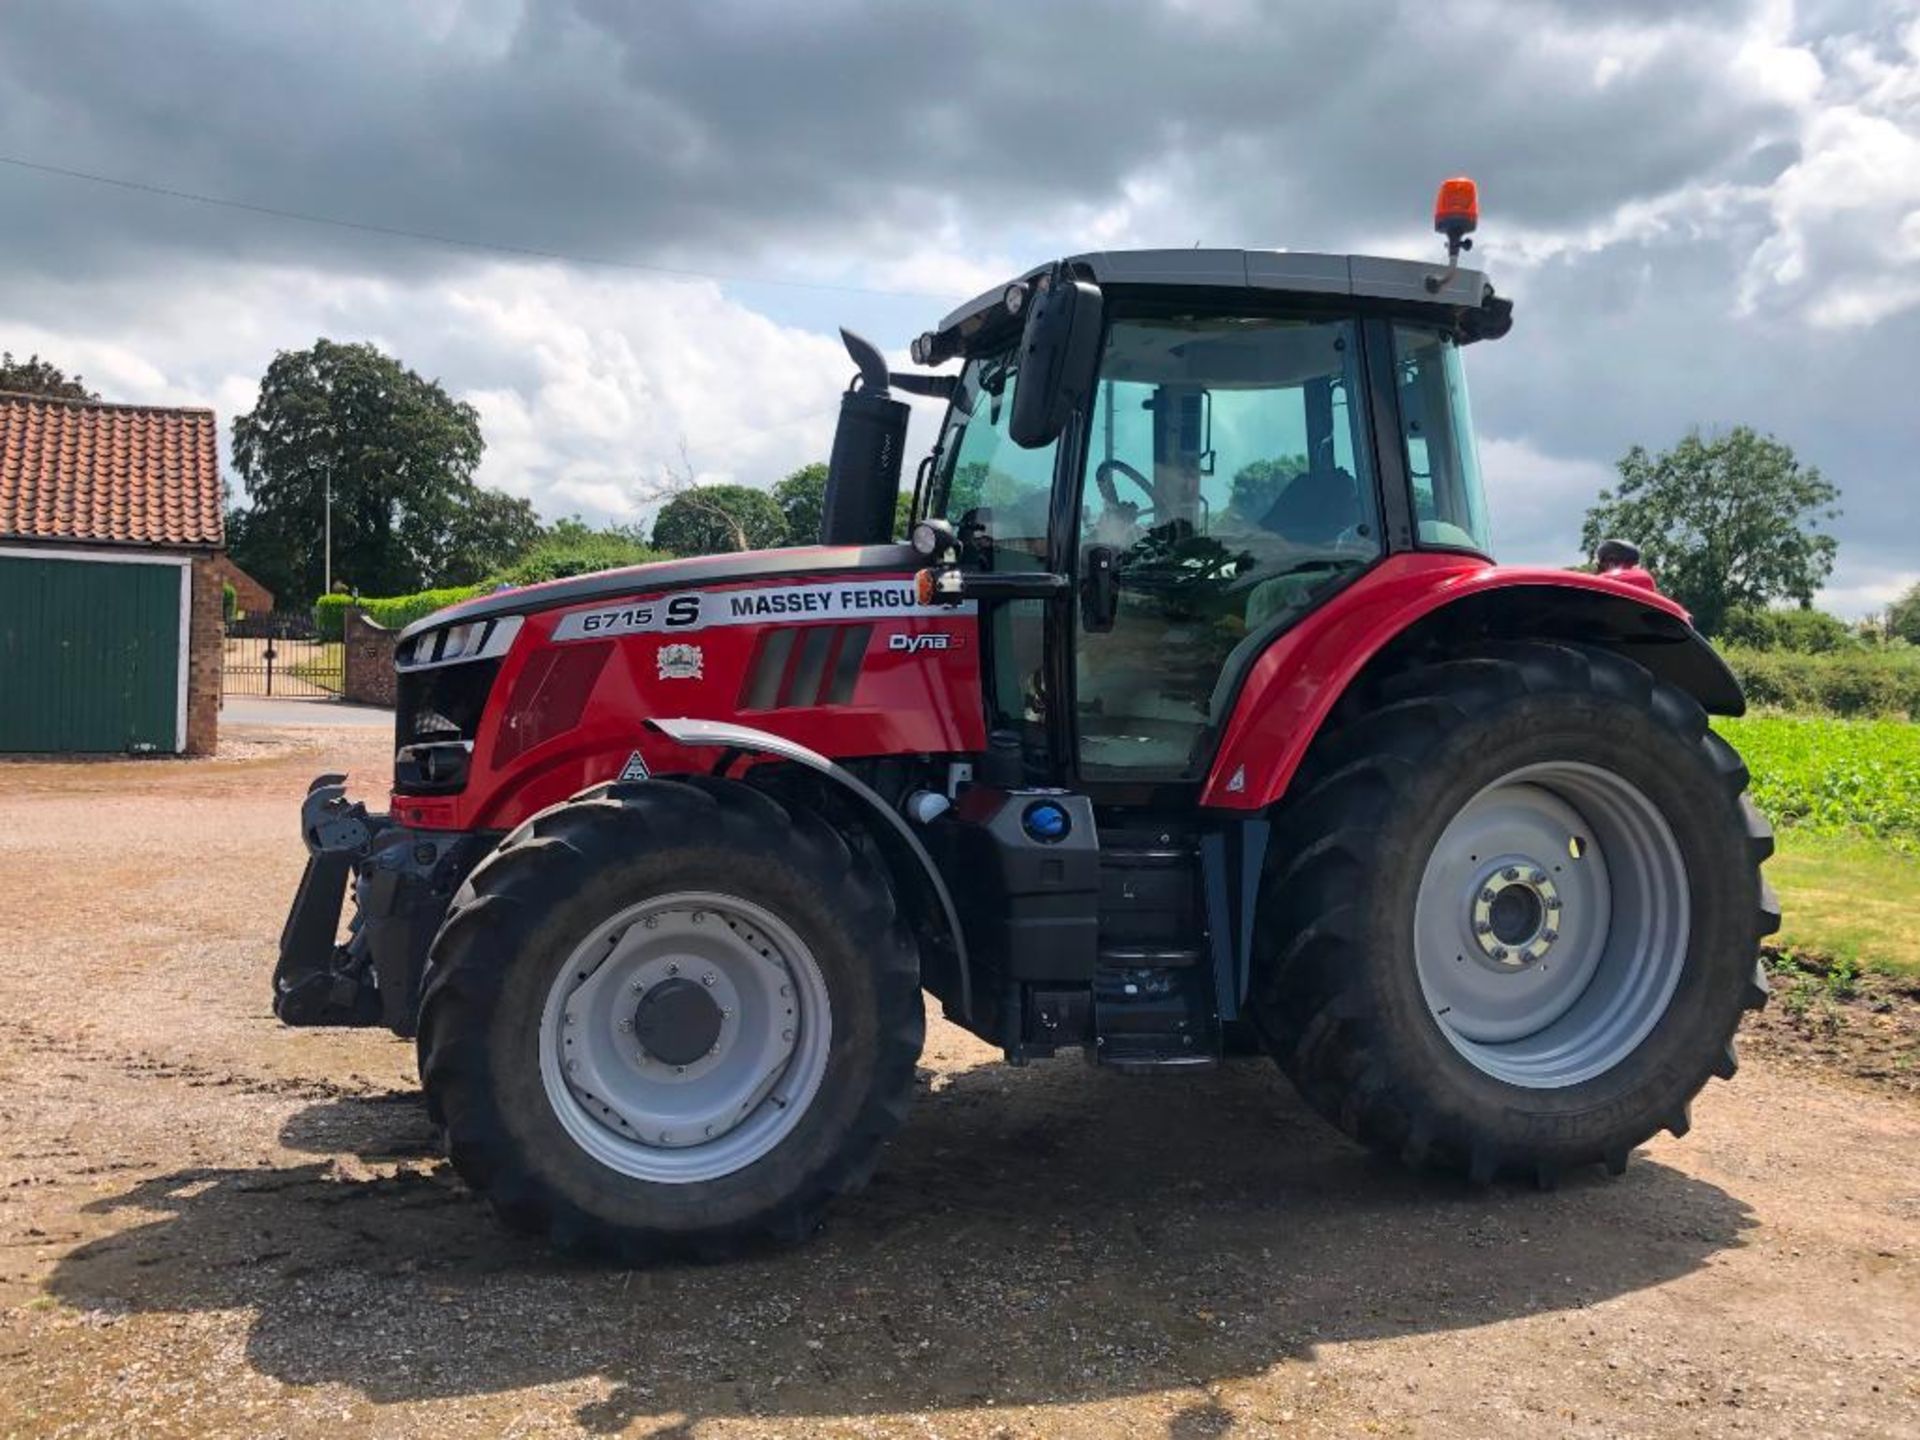 2019 Massey Ferguson 6715 S Dyna 6 50kph 4wd tractor c/w 3 manual spools, front linkage, air brakes, - Image 7 of 41